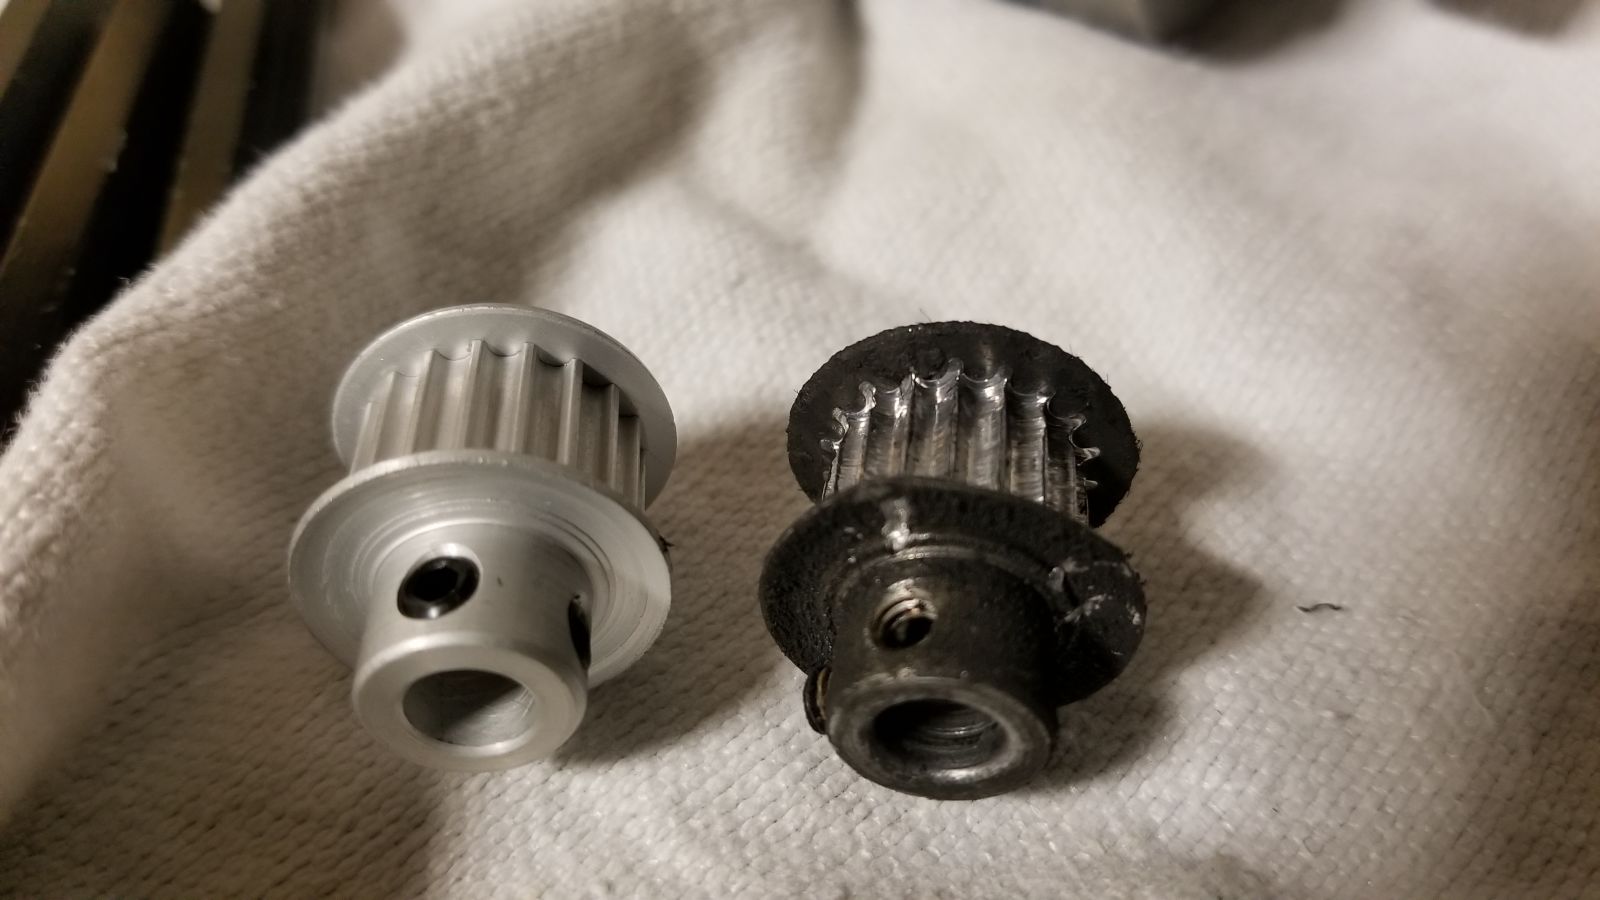 The little guy on the right was way overdue for replacement. You can see how the aluminum wore from where the teeth originally were!!!